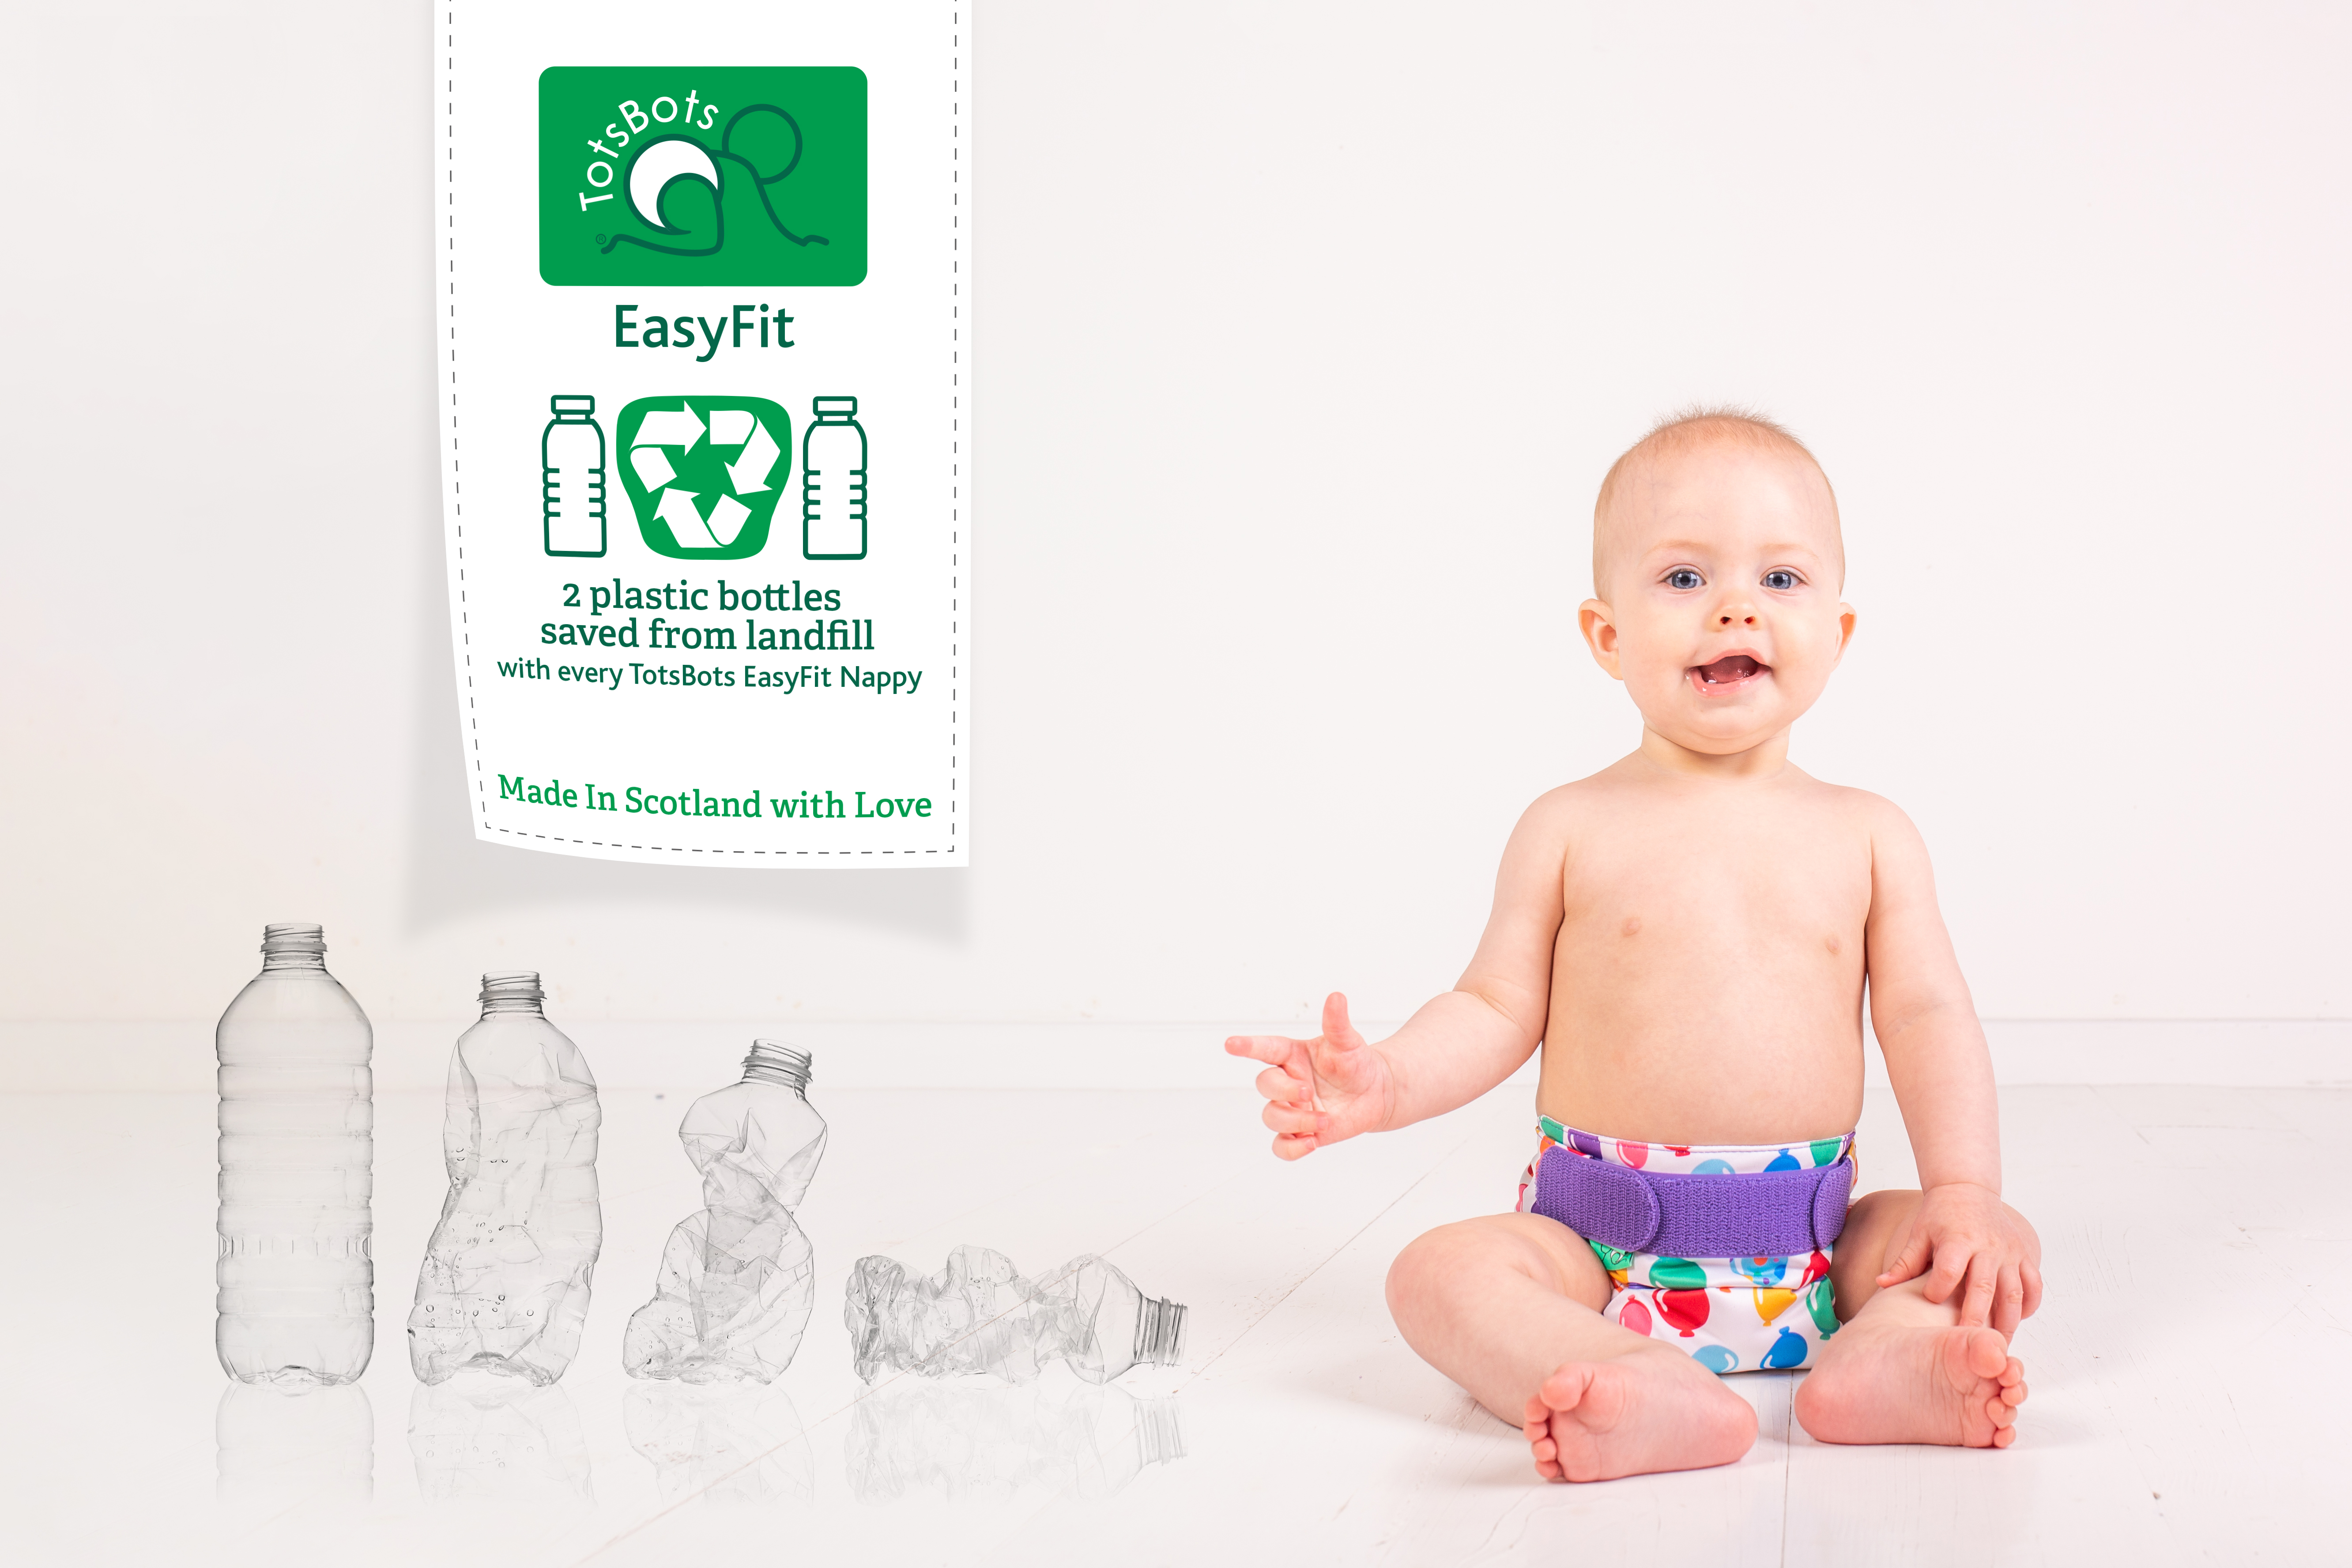 Old Reusable Nappies: Innovative Ways to Repurpose Old Reusable